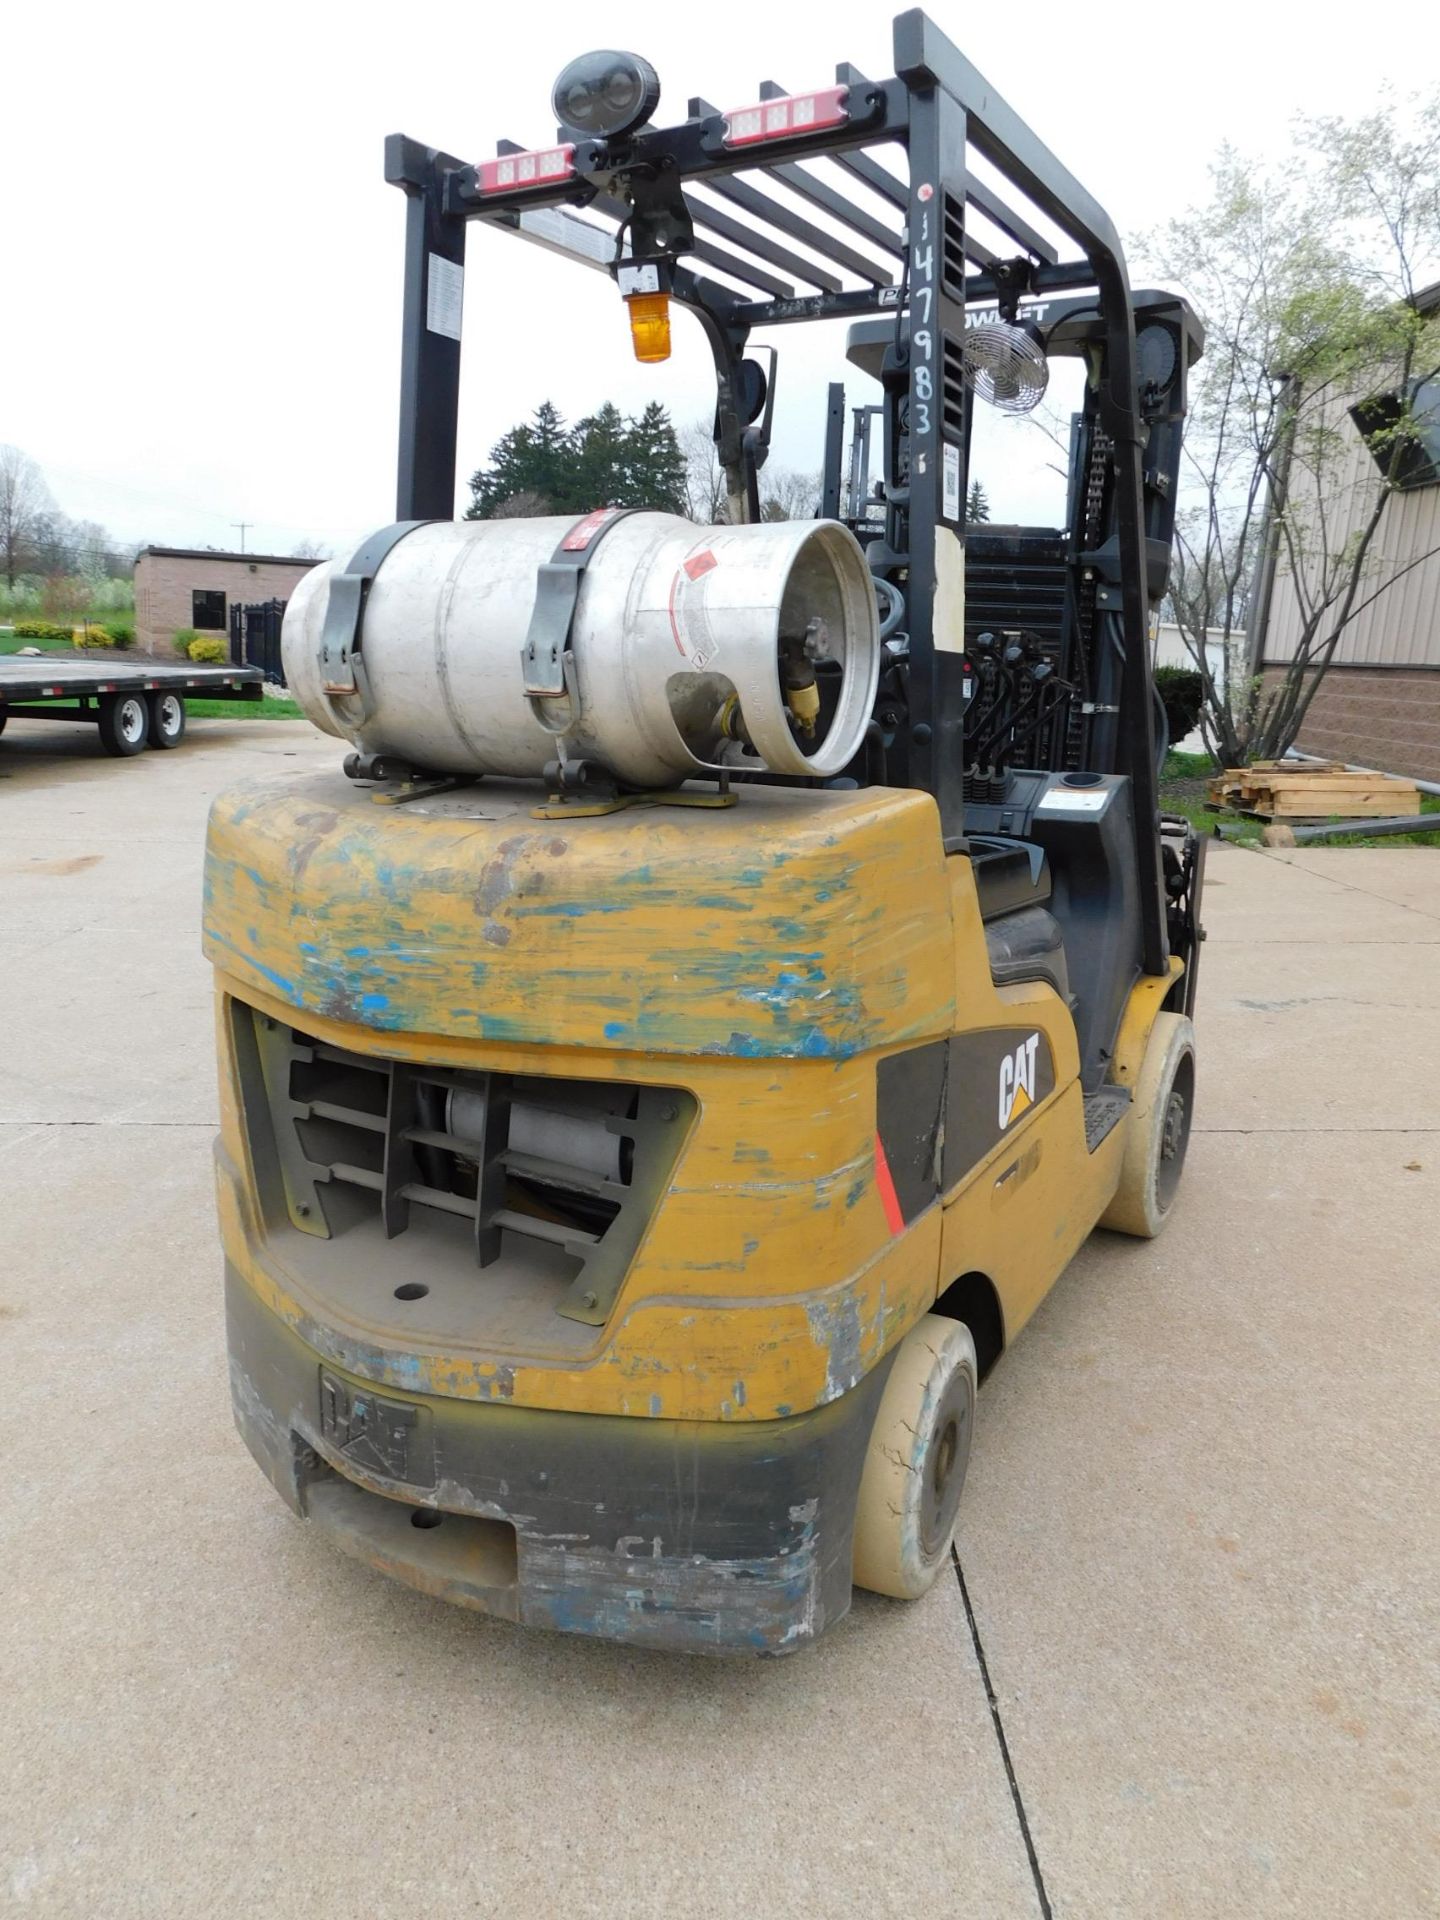 Caterpillar Model 2C6000 Forklift, SN AT83F40876, 4,500 lb cap., LP, Non-Marking Hard Tires, 3-Stage - Image 6 of 21